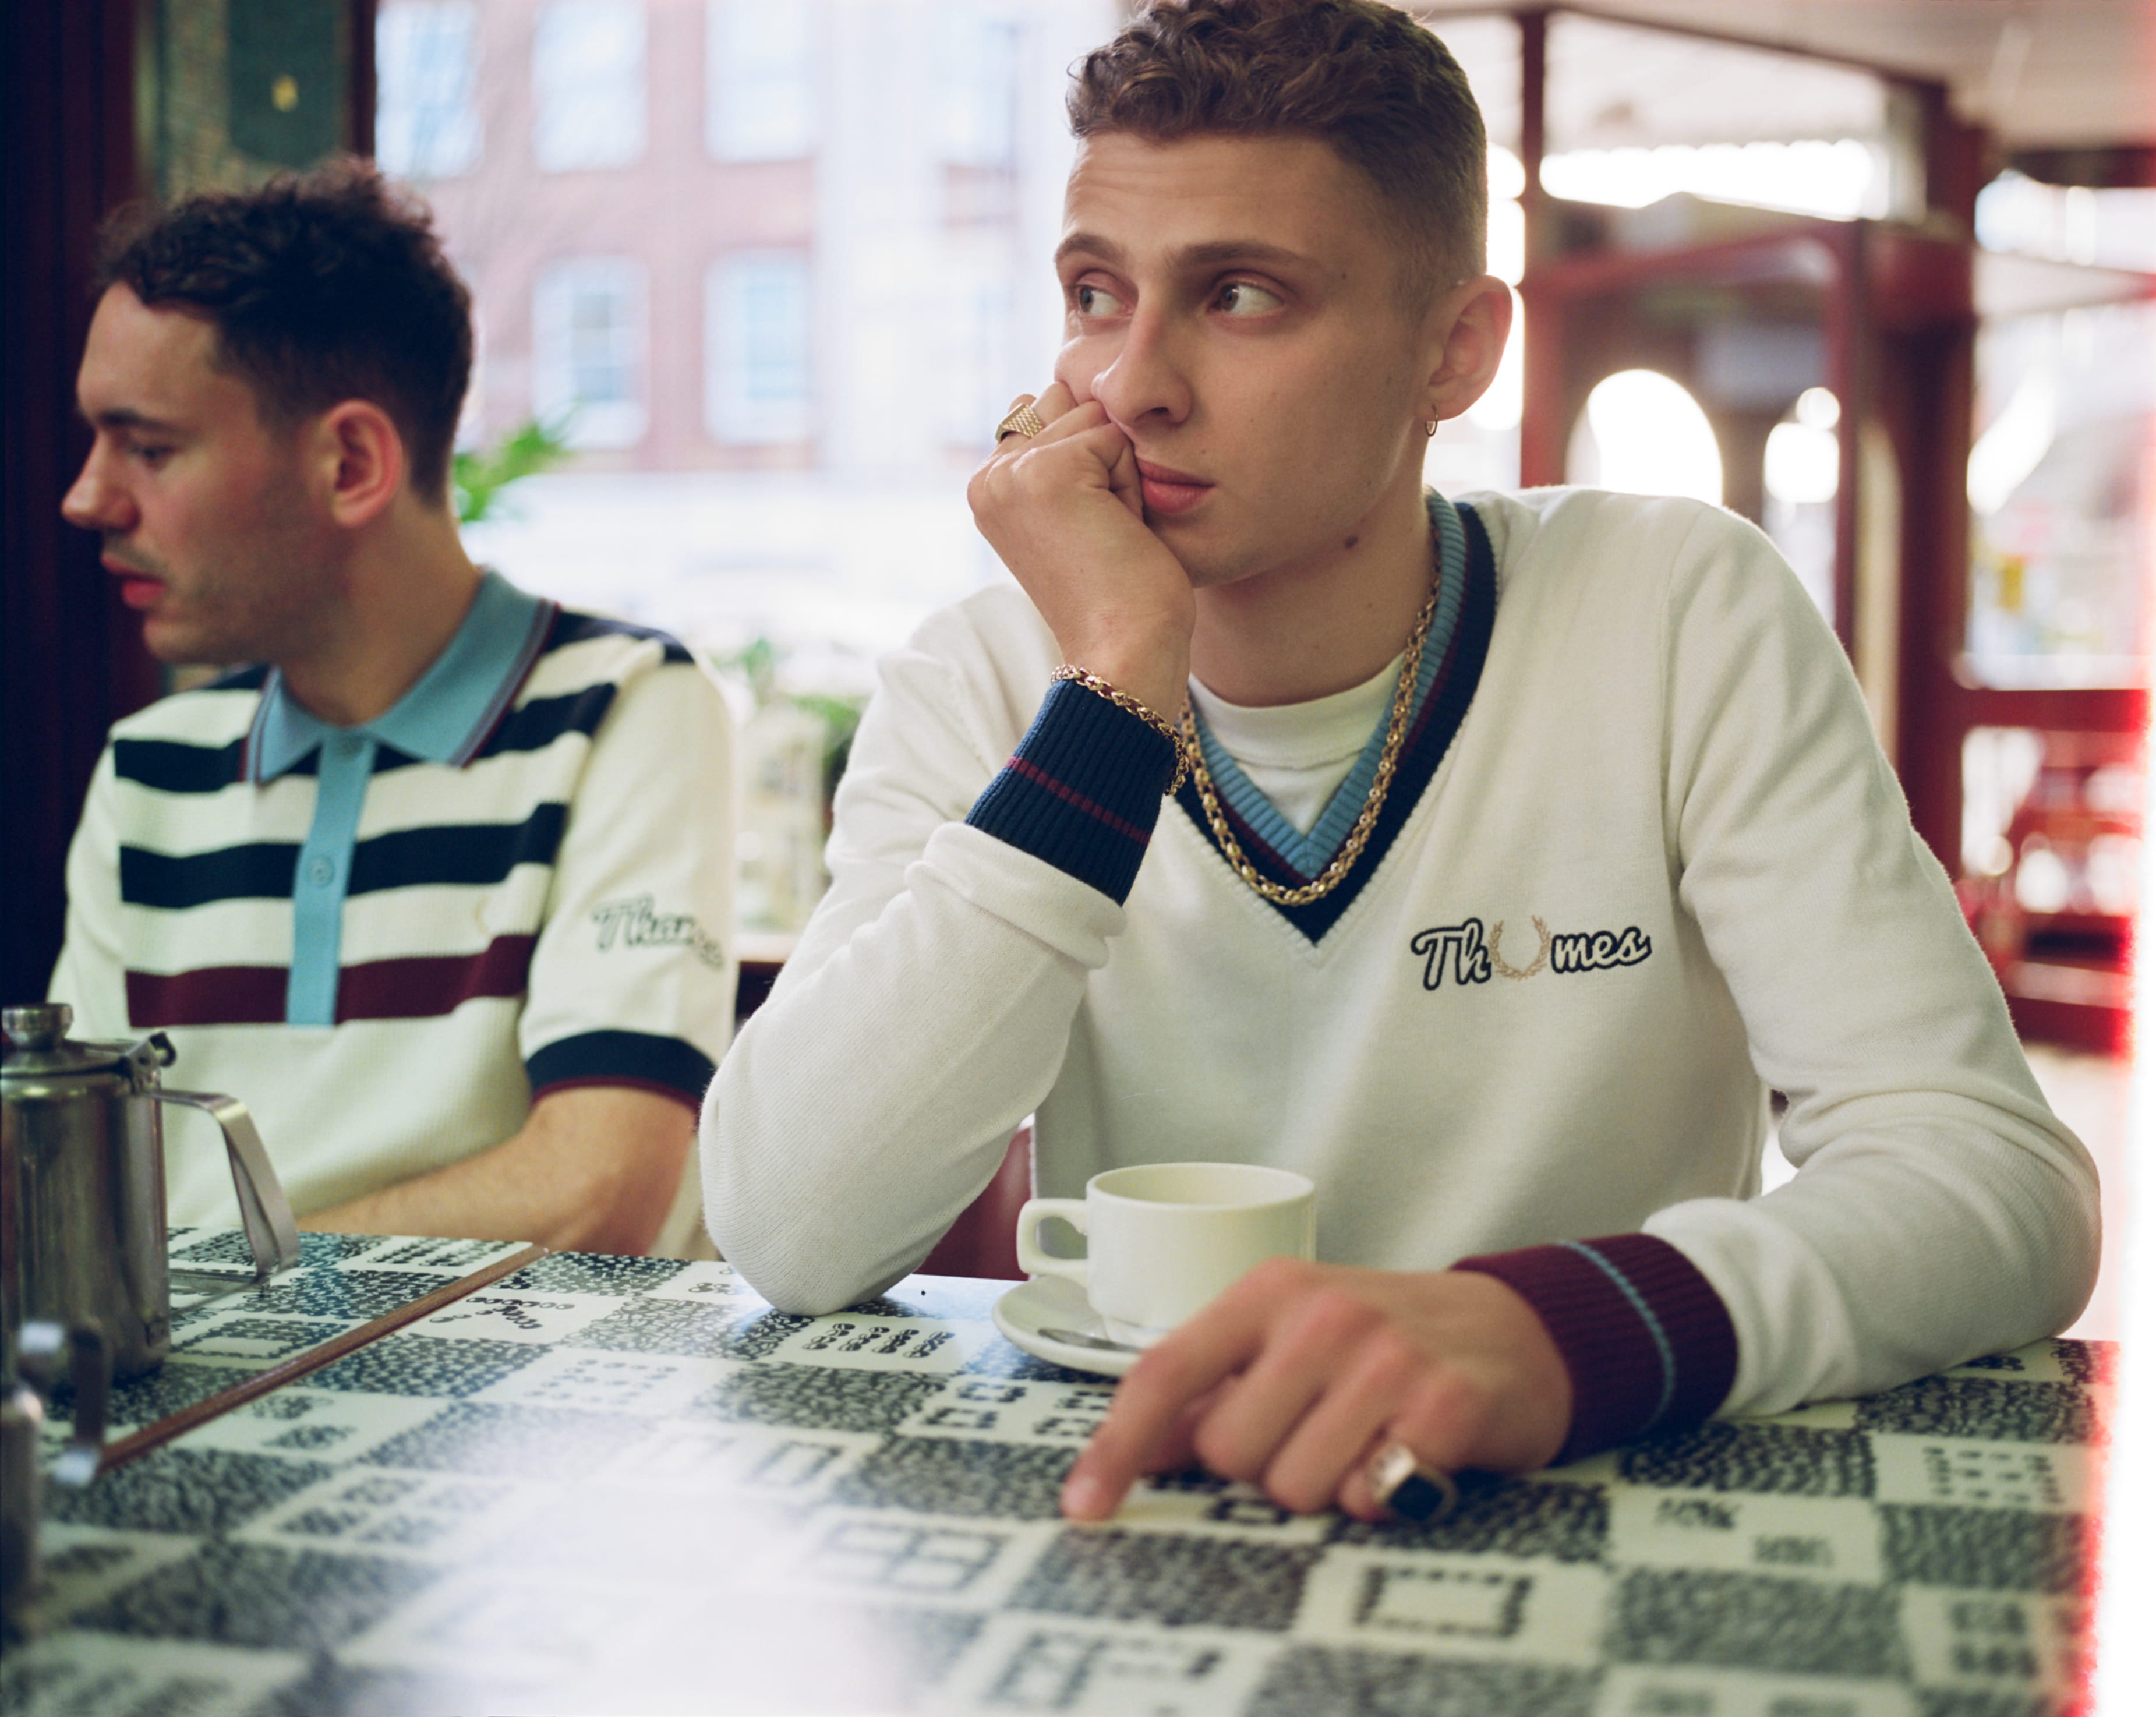 Fred Perry and Thames Present Their New His & Hers Collaboration 'Fifth